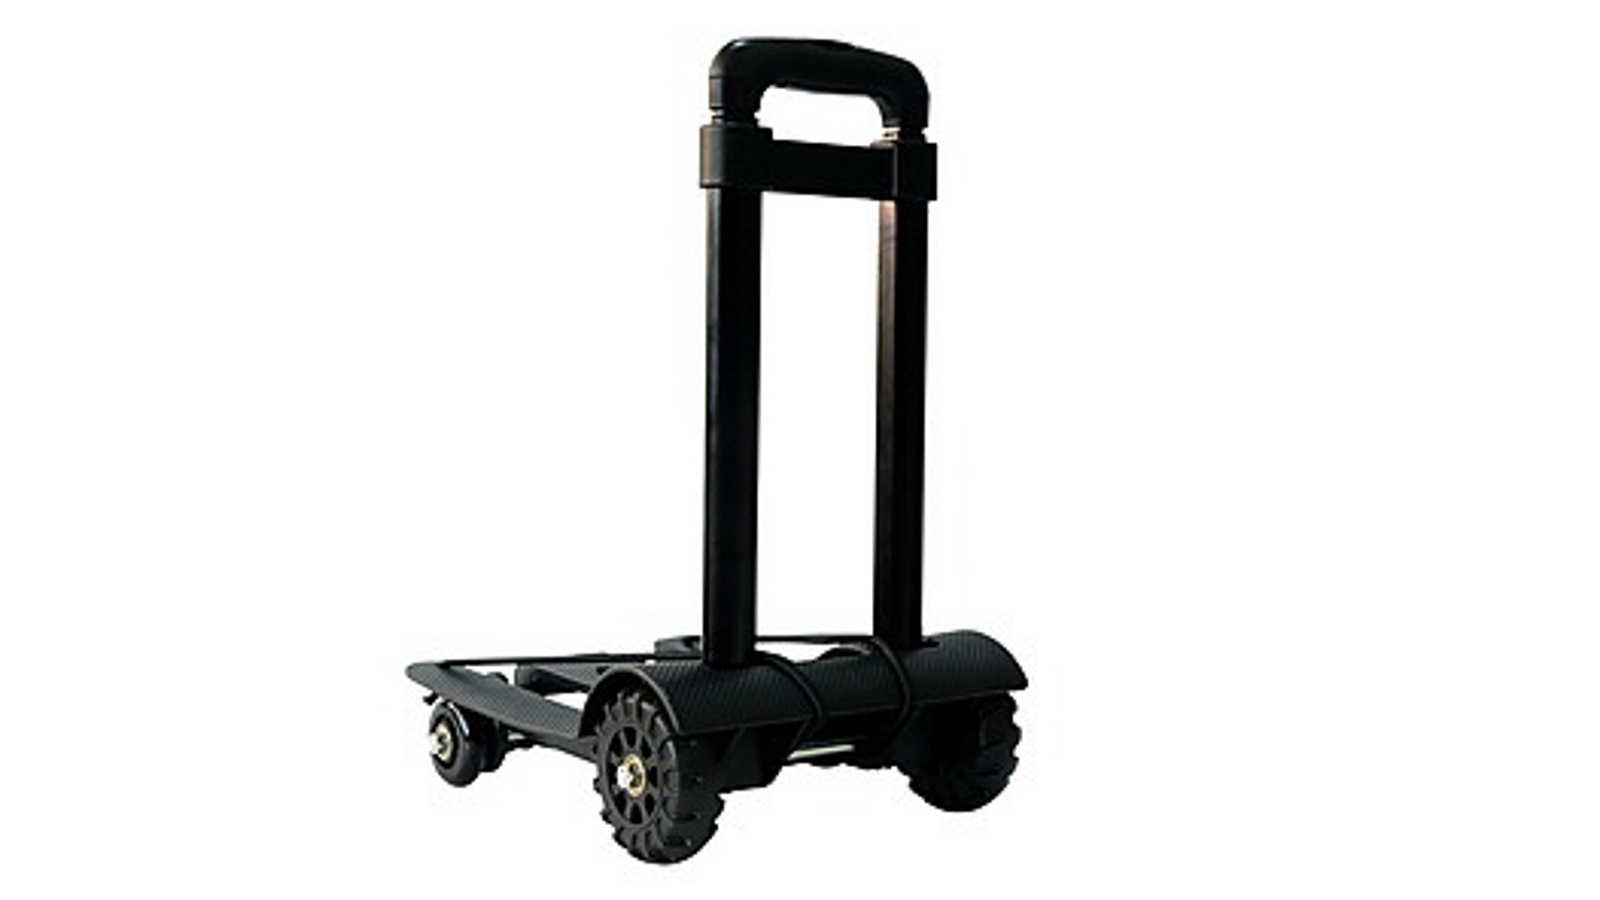 Details about   170lbs Collapsible Cart Folding Dolly Trolley Push Hand Truck Moving Warehouse* 